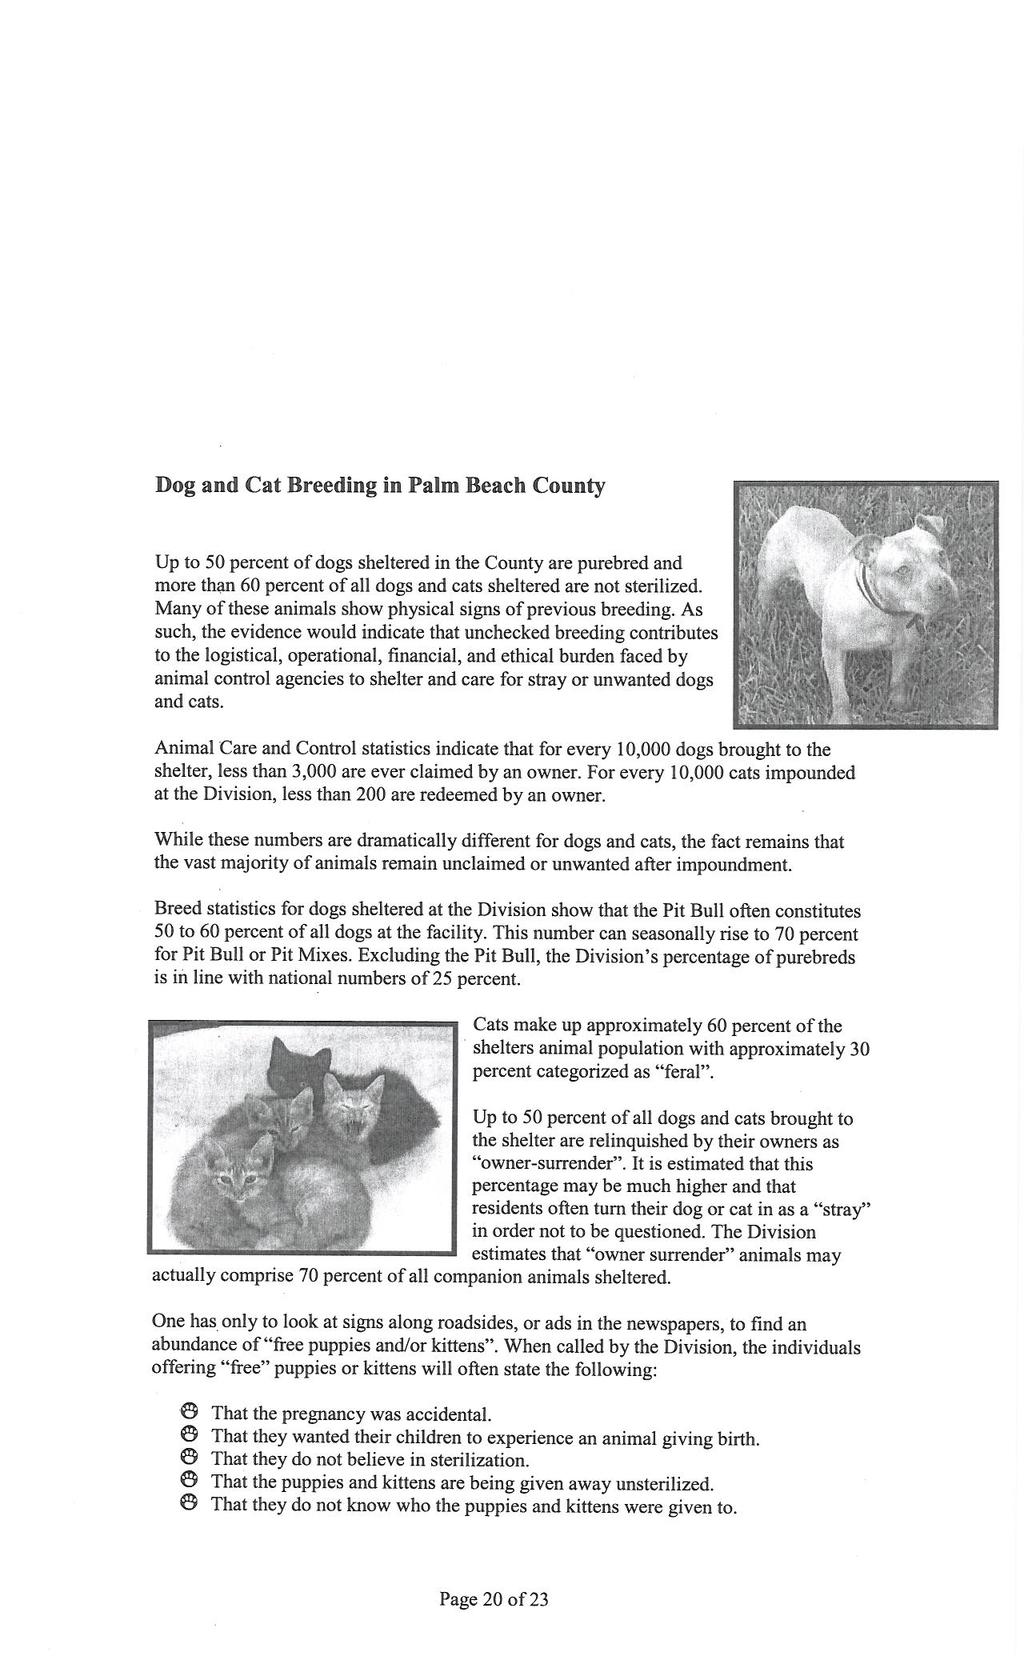 Dog and Cat Breeding in Palm Beach County Up to 50 percent of dogs sheltered in the County are purebred and more th:;m 60 percent of all d!ogs and cats sheltered are not sterilized.